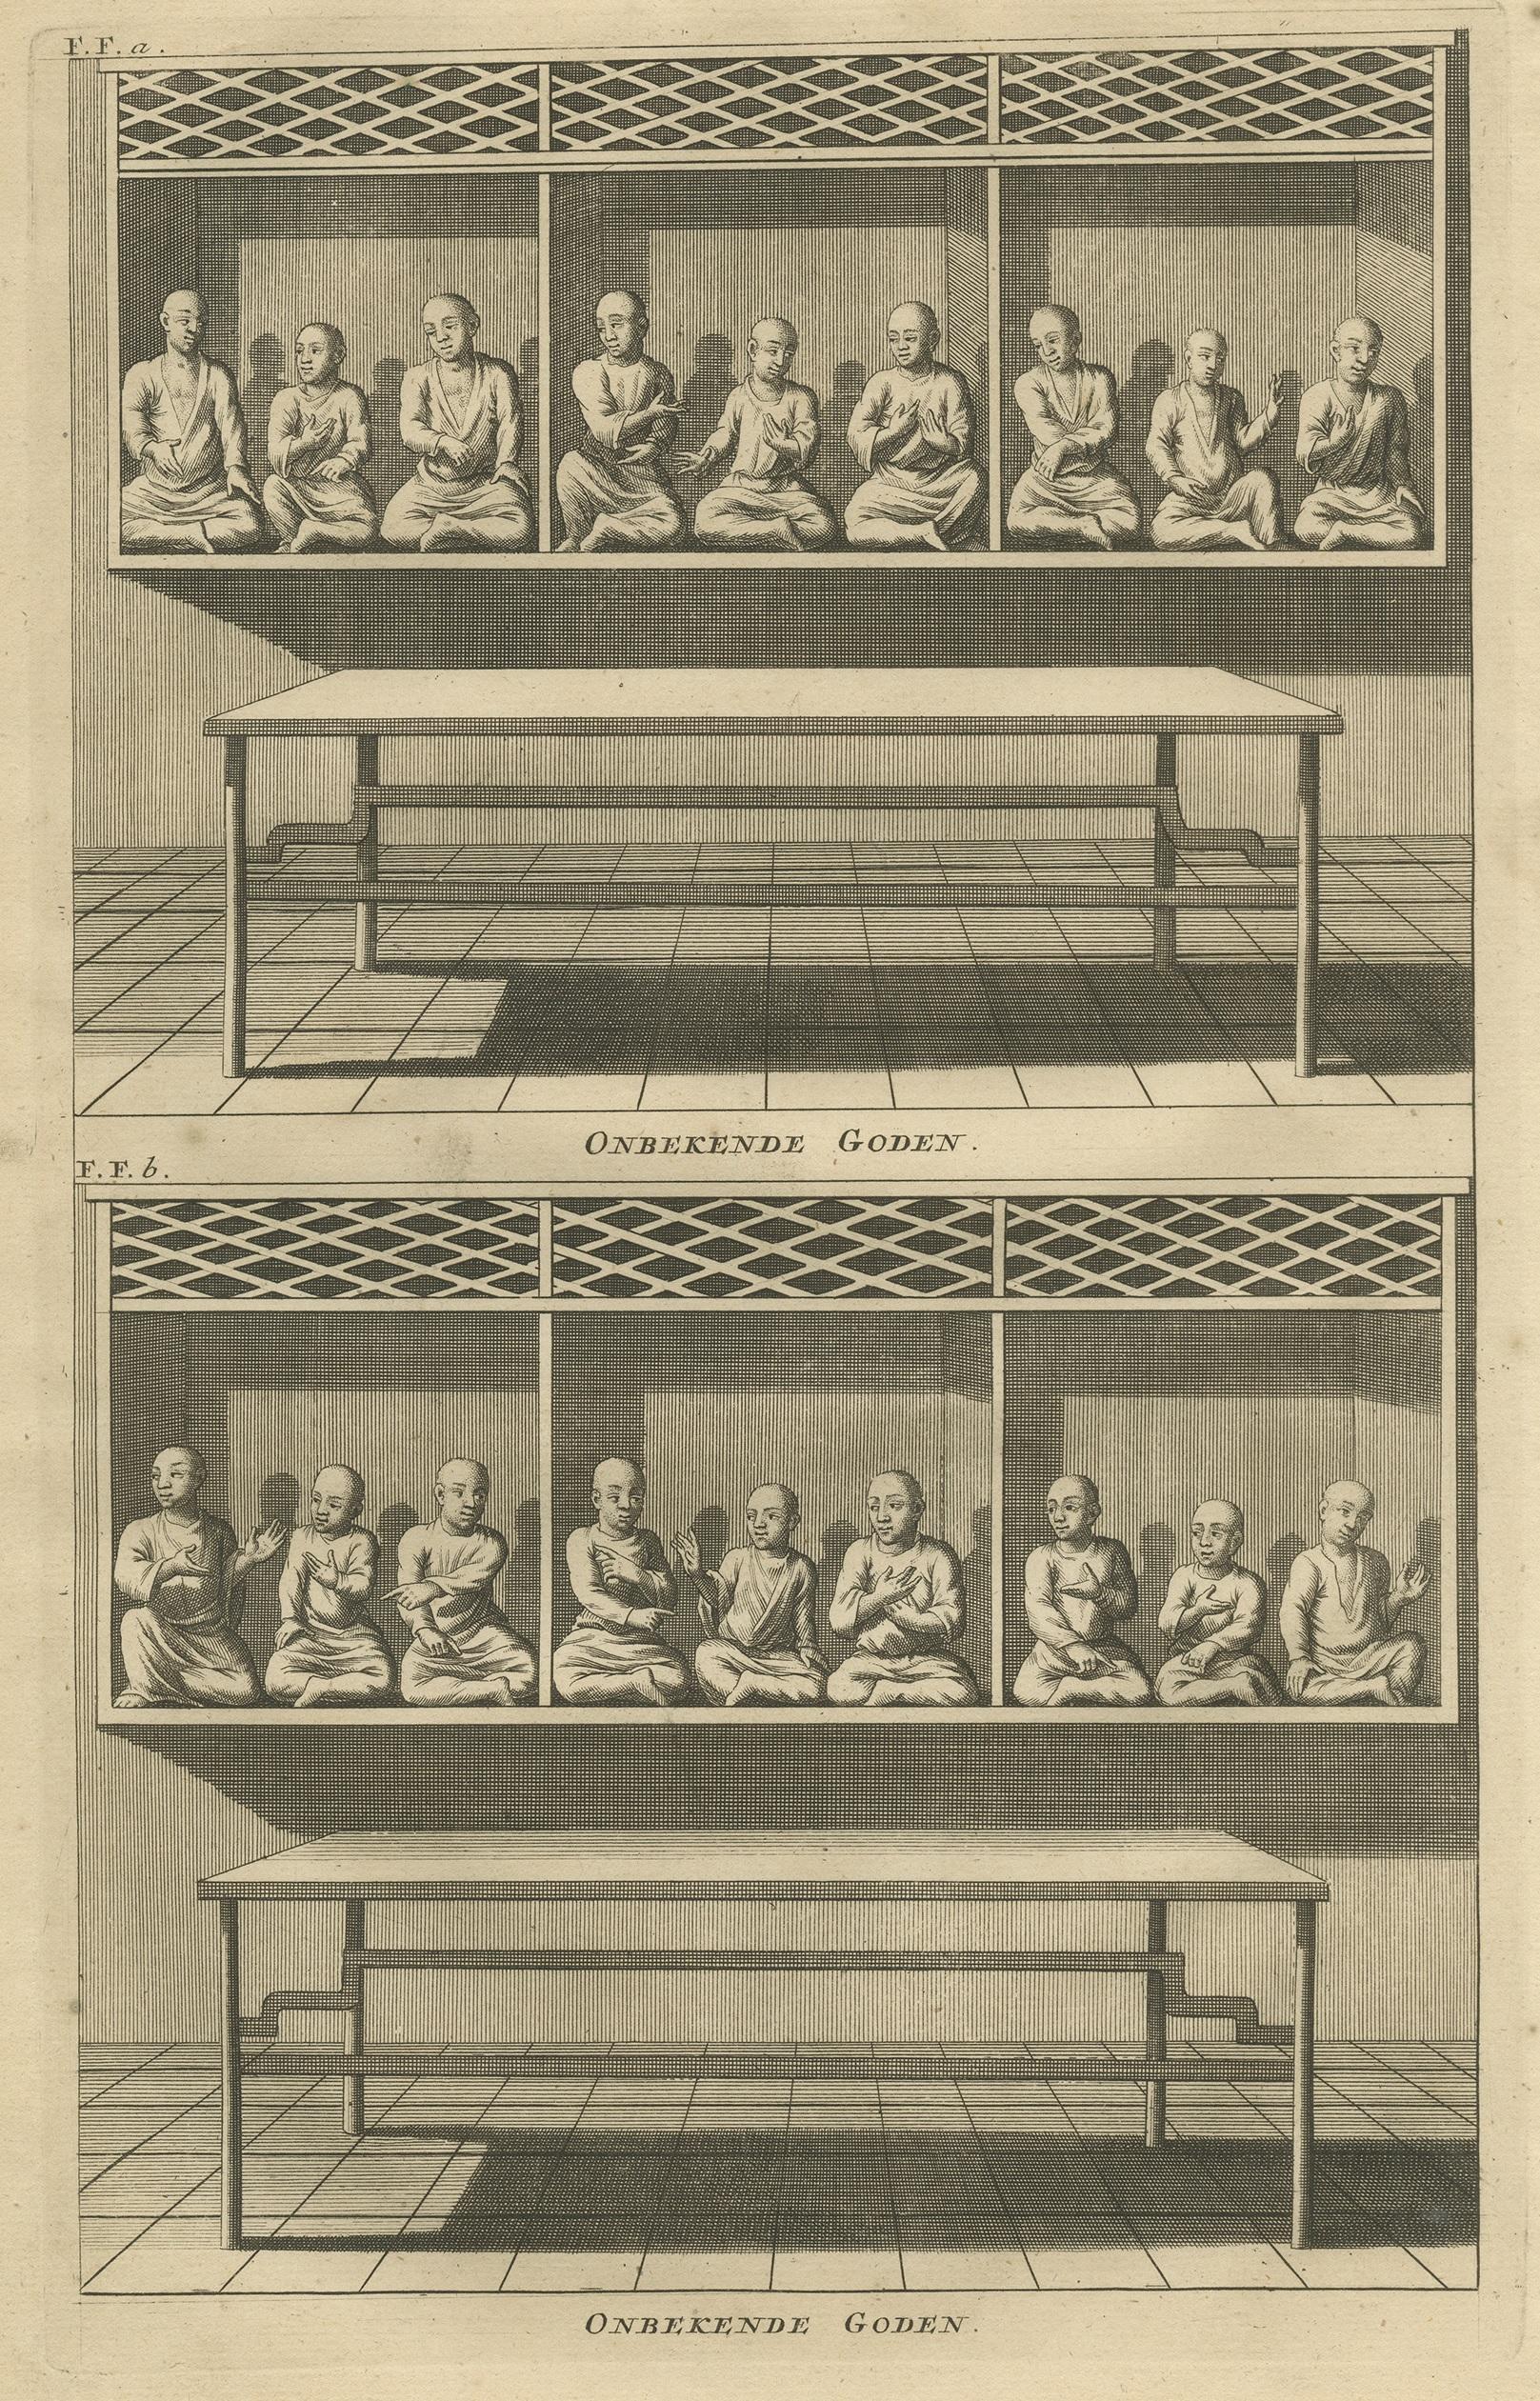 Antique print titled 'Intrede des Chineschen Tempels - De Chineesche God Calamija'. Copper engraving of two female deities of Chinese Buddhism in Indonesia; Quanteja and Quam Iem Hoedso. This print originates from 'Oud en Nieuw Oost-Indiën' by F.